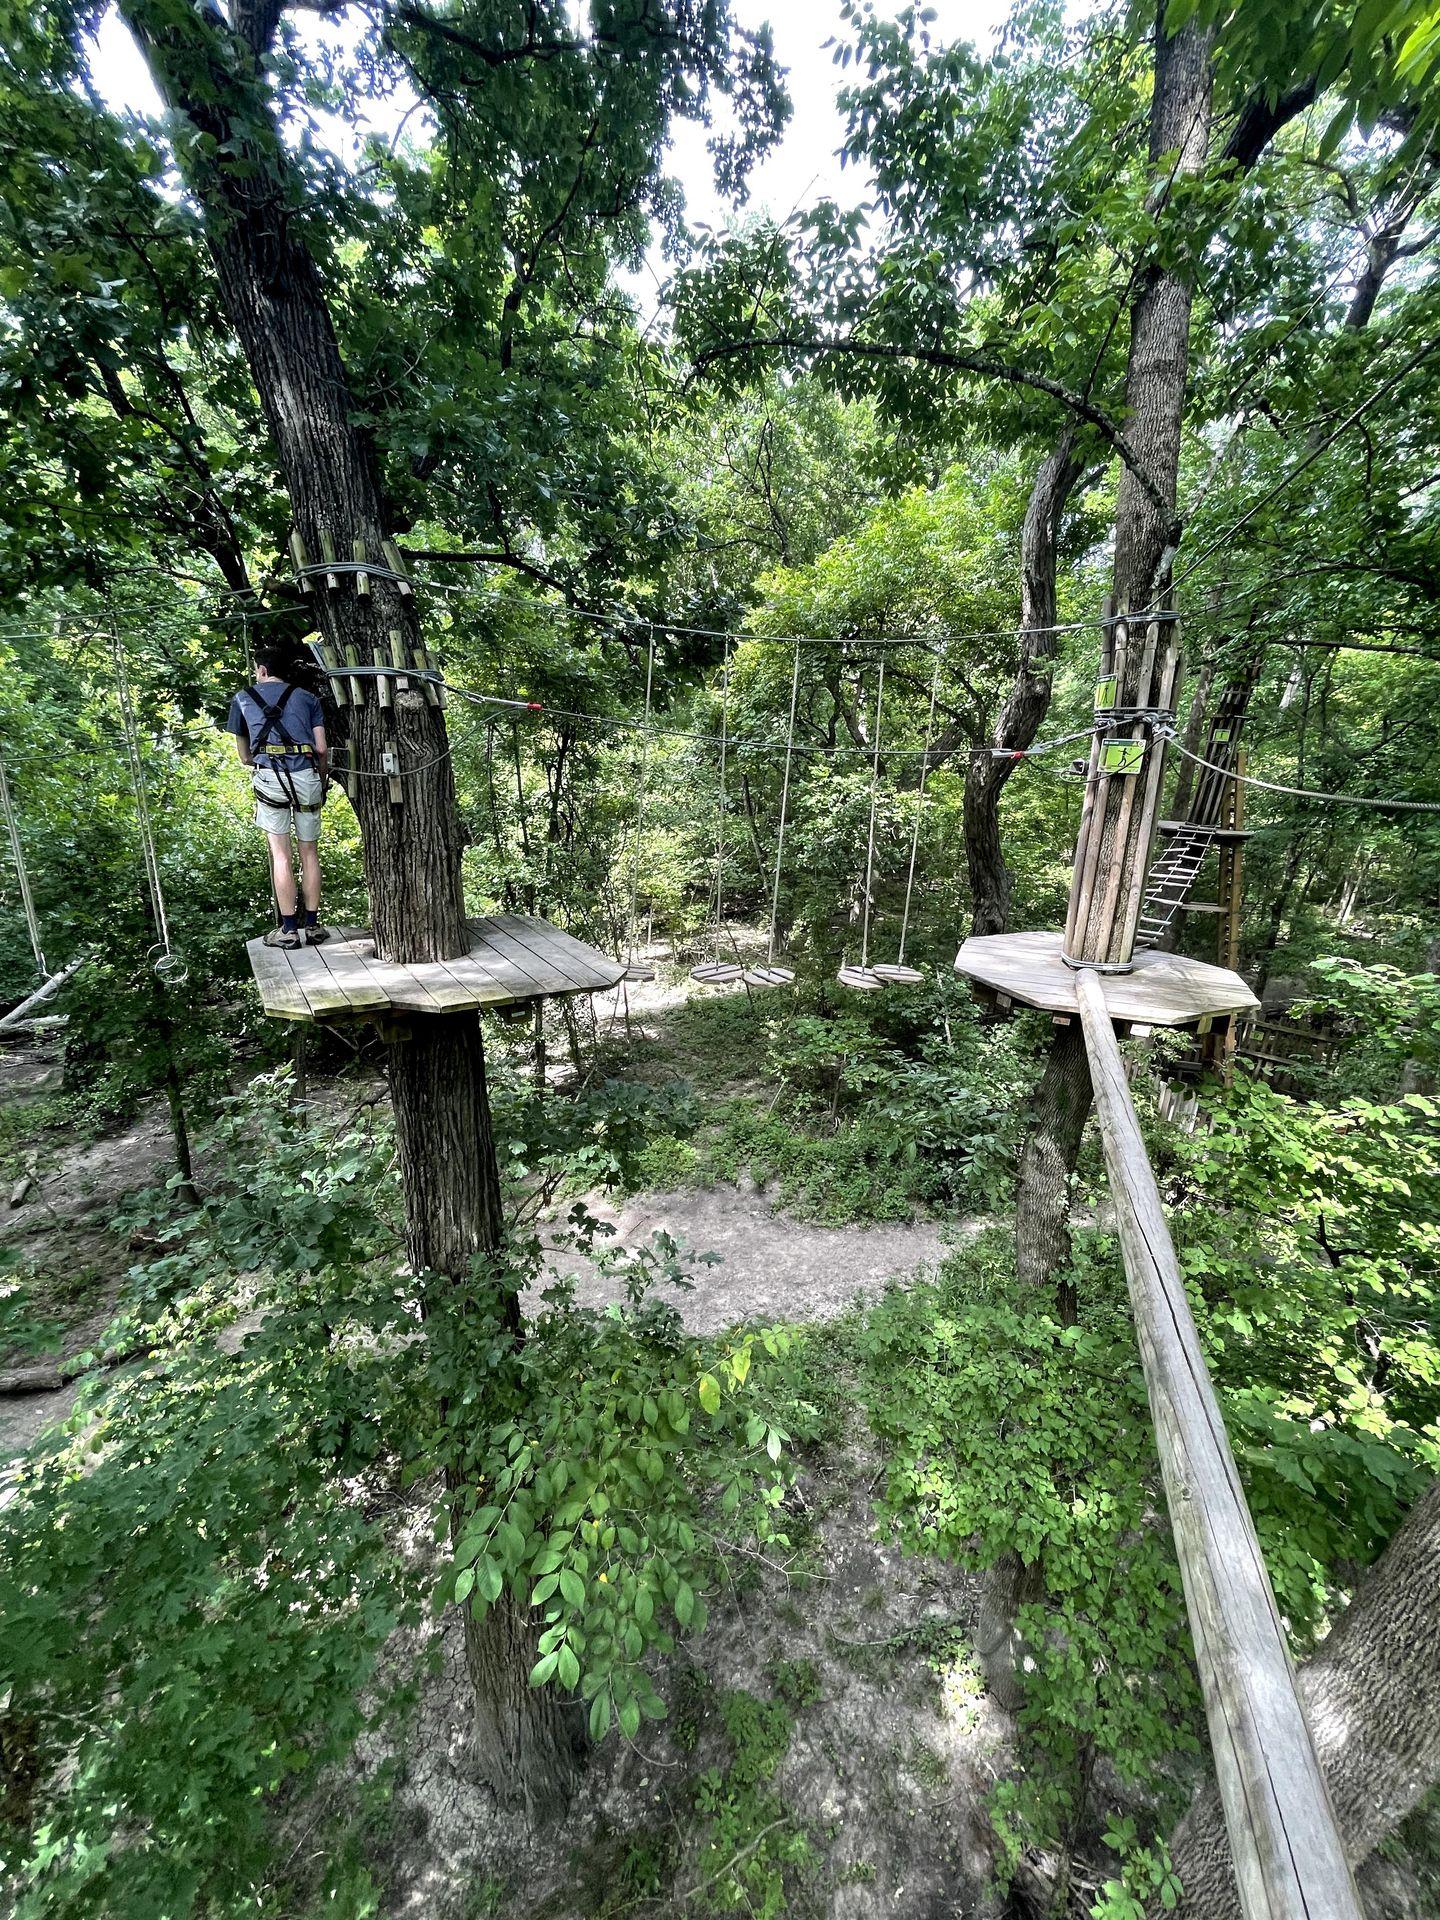 A treetop canopy course. There are wooden platforms around trees and various ropes going between the trees.